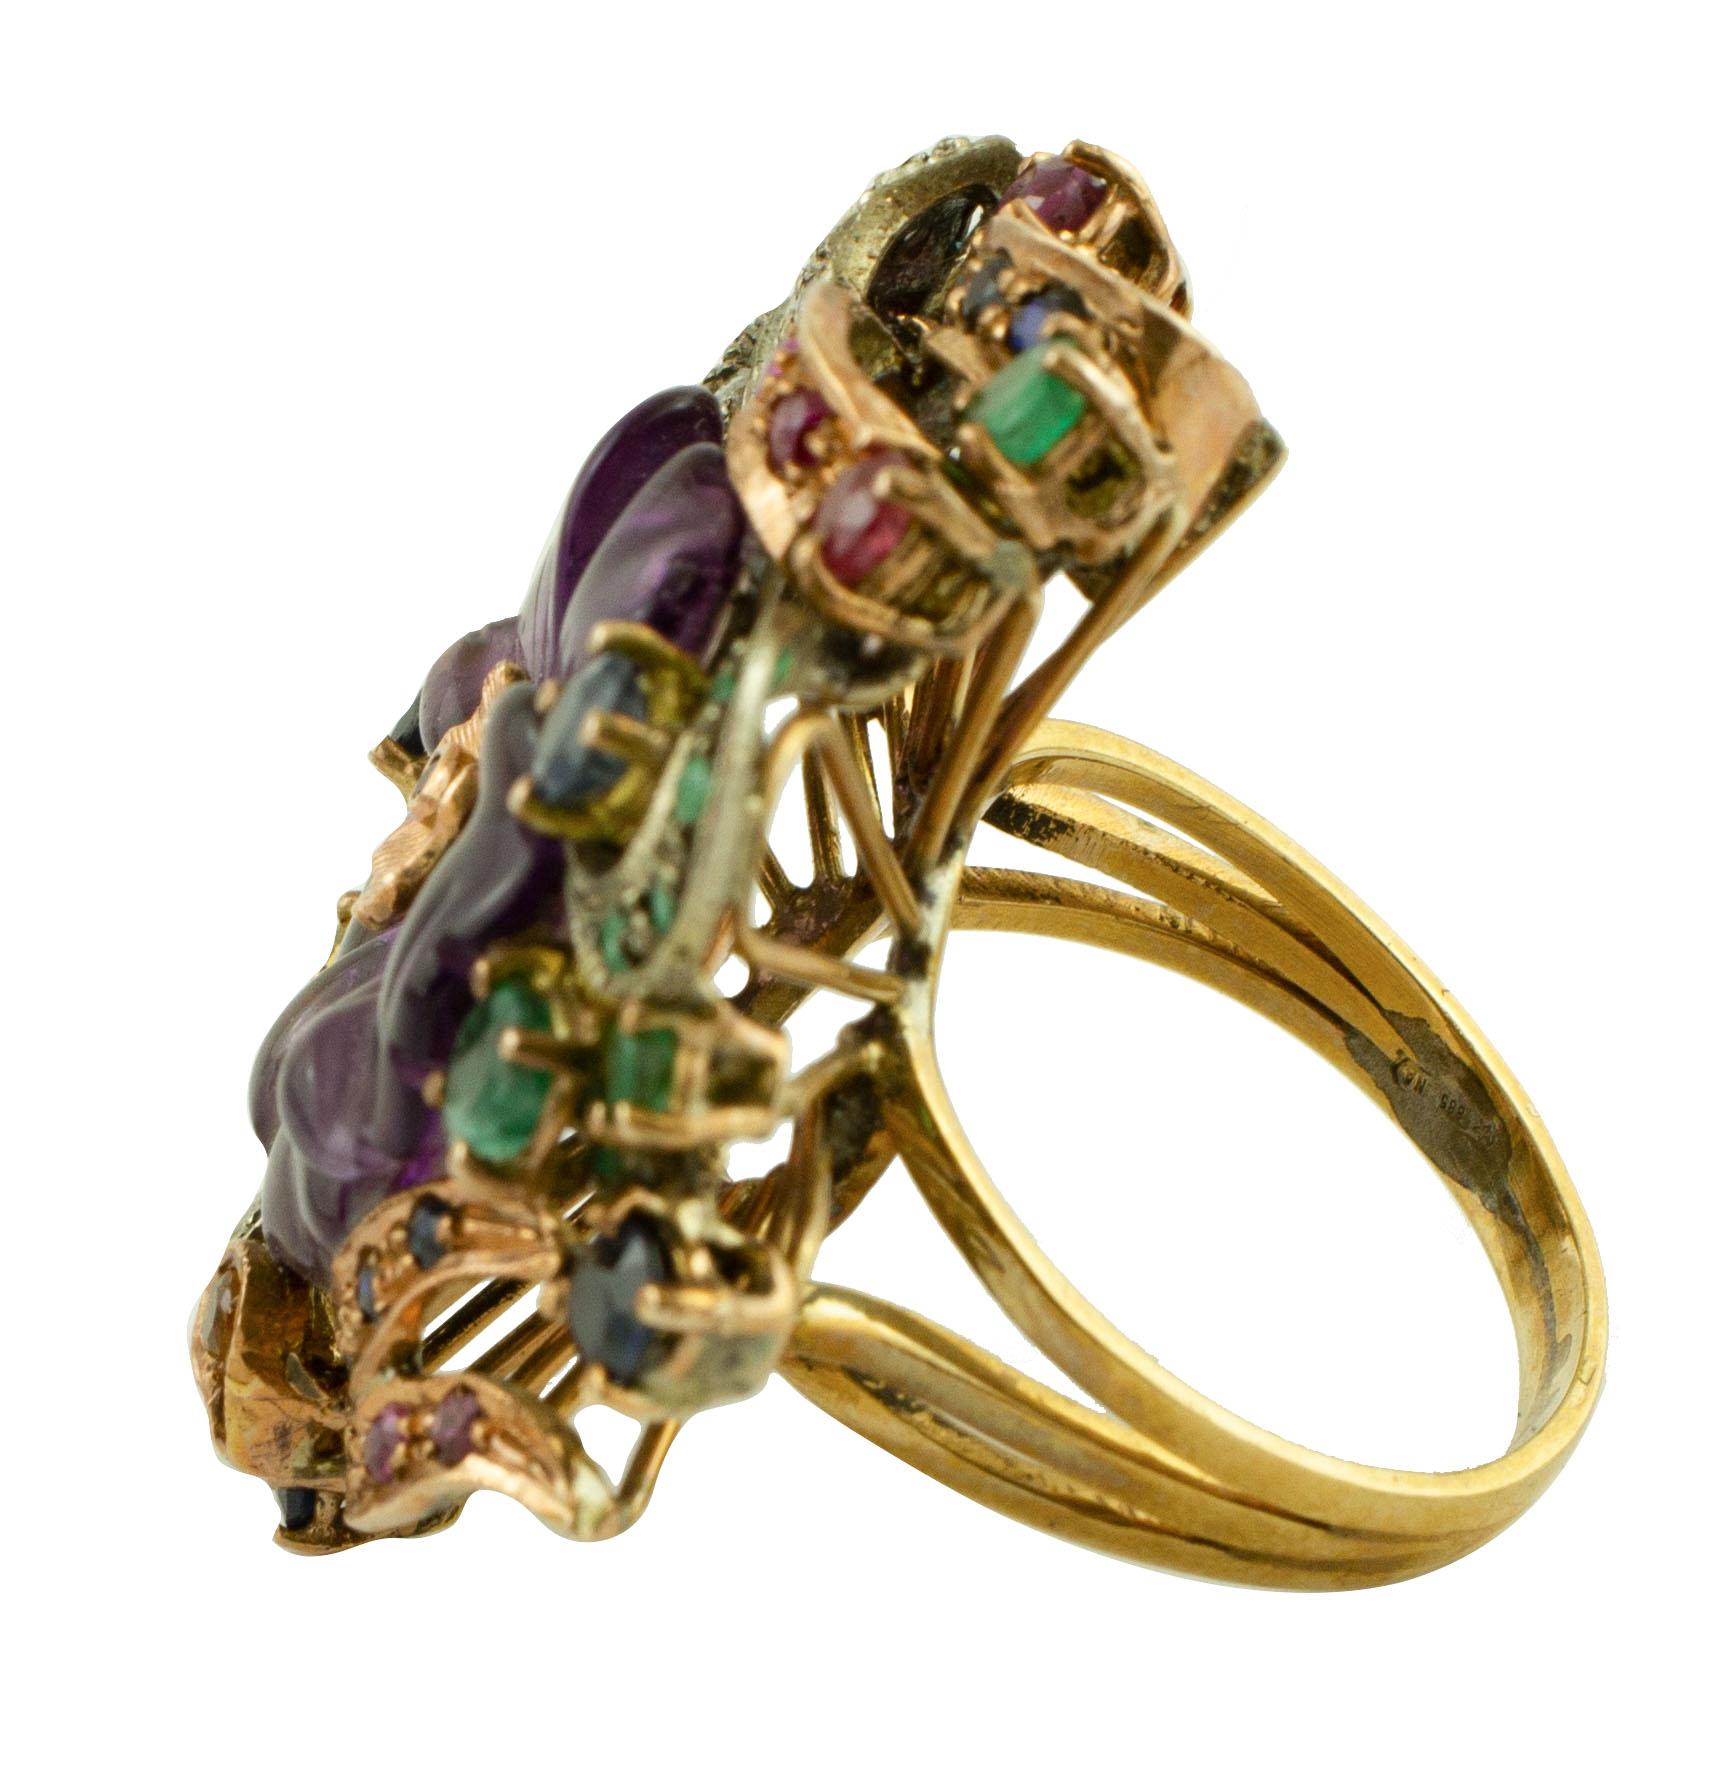 Amazing ring in 9k rose gold and silver, embellished with a central amethyst, surrounded by leaves studded with diamonds, emeralds, sapphires and rubies.
Diamonds 0.36 ct
Emeralds Sapphires Rubies 3.44 ct
Amethyst 1.80 gr
Total weight 13.4 gr
This